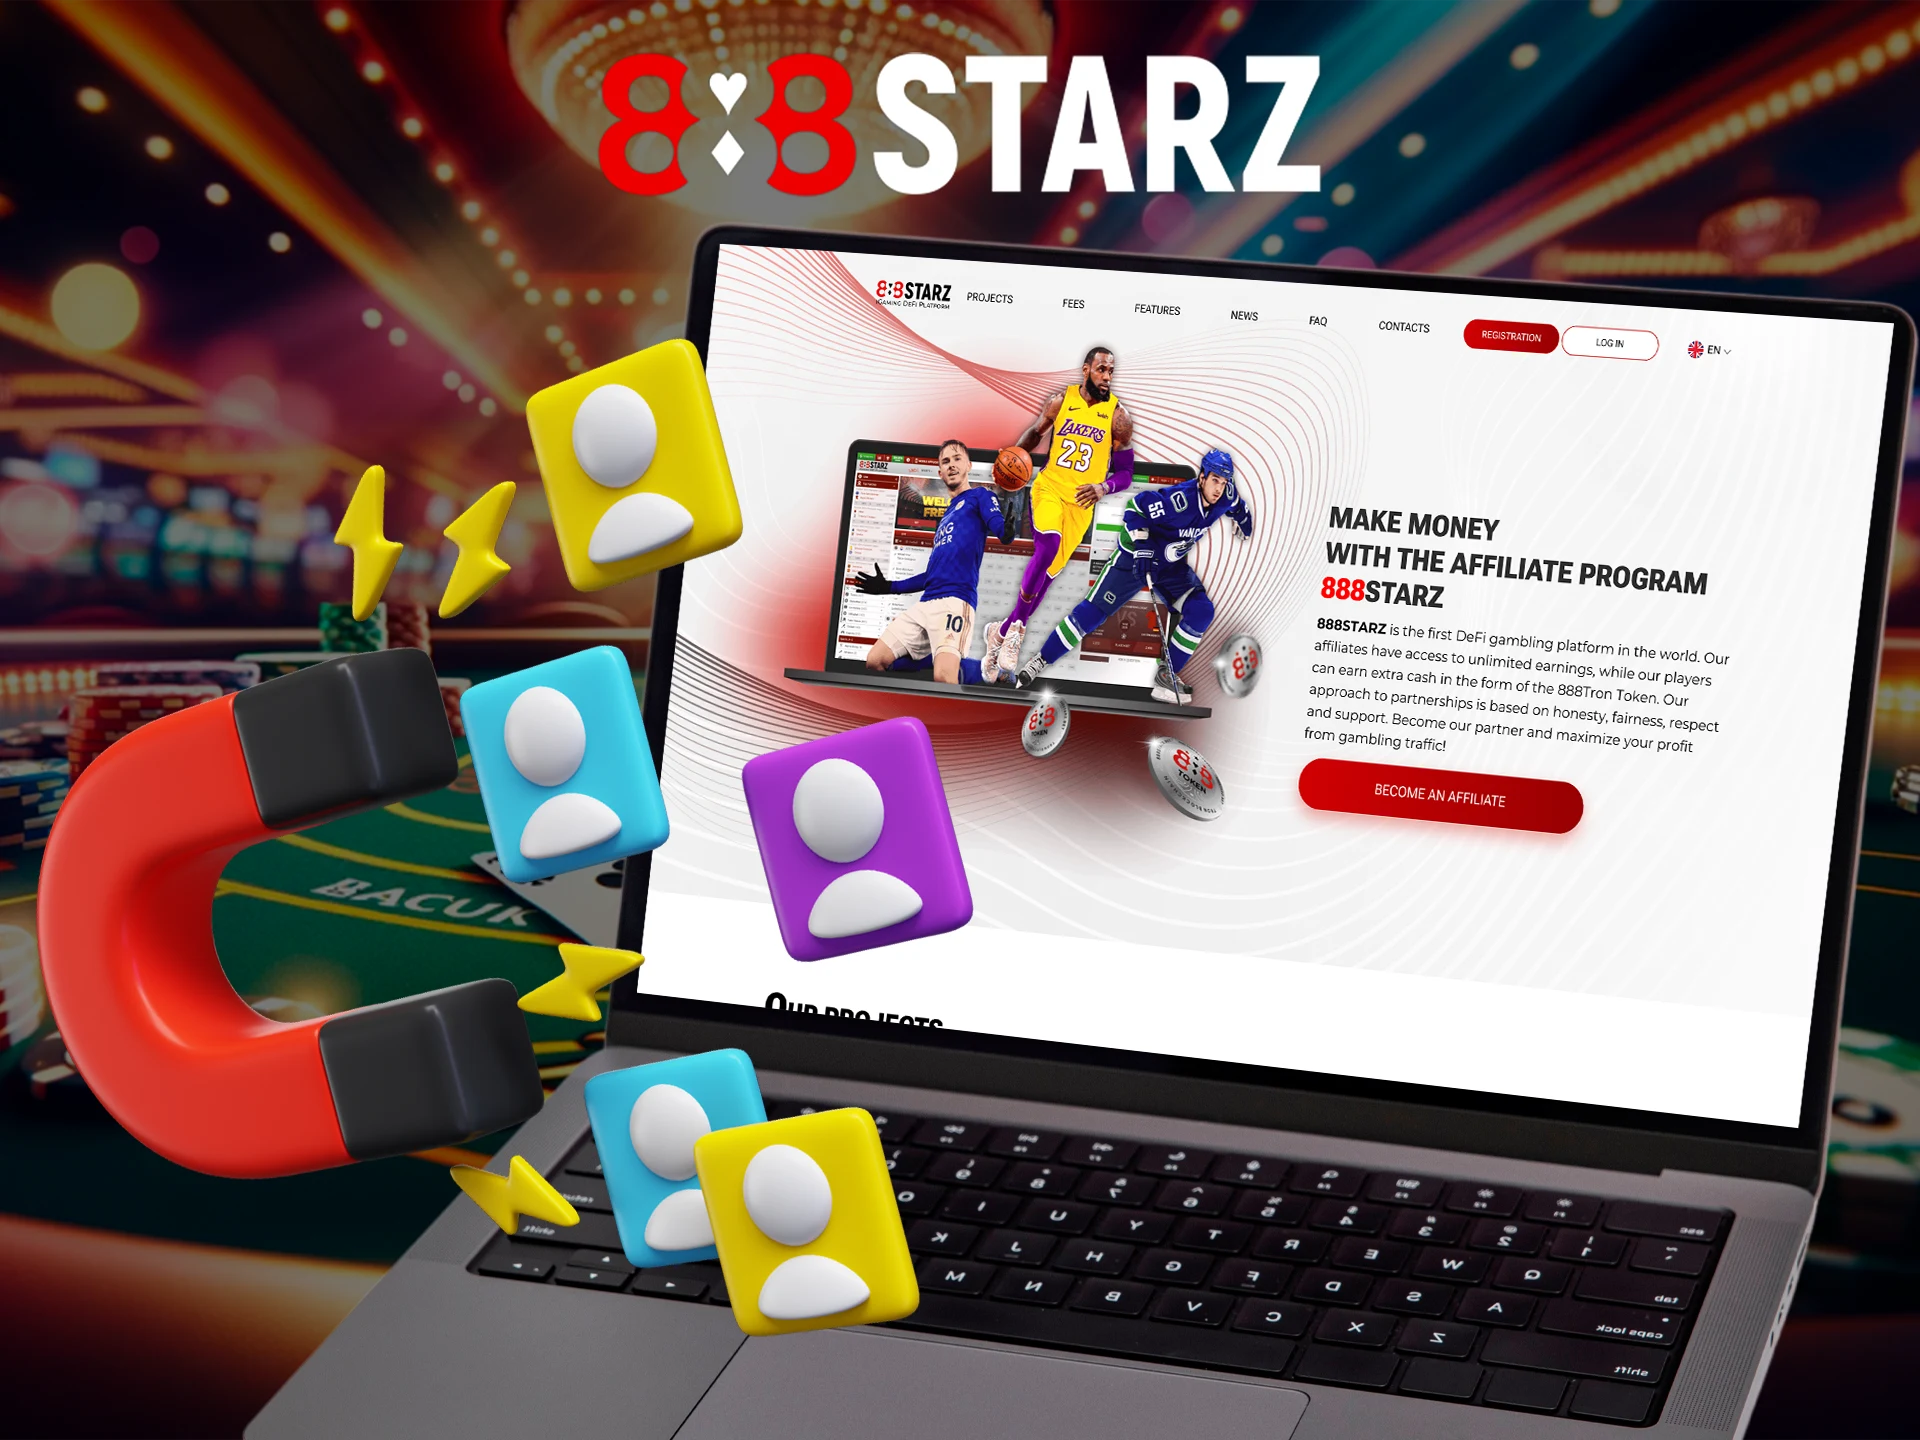 Take a closer look at the 888Starz casino affiliate programme.